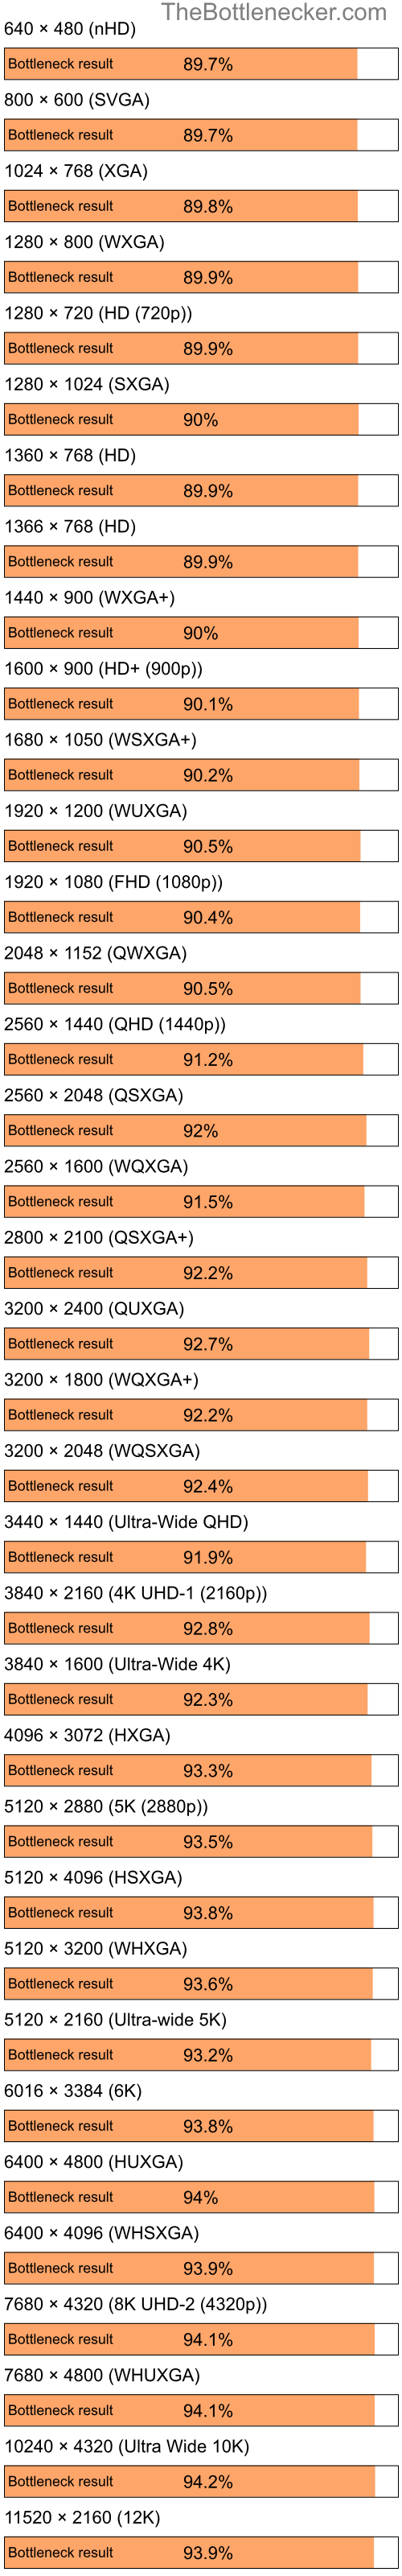 Bottleneck results by resolution for Intel Pentium 4 and AMD Radeon 9200 PRO Family in Processor Intense Tasks